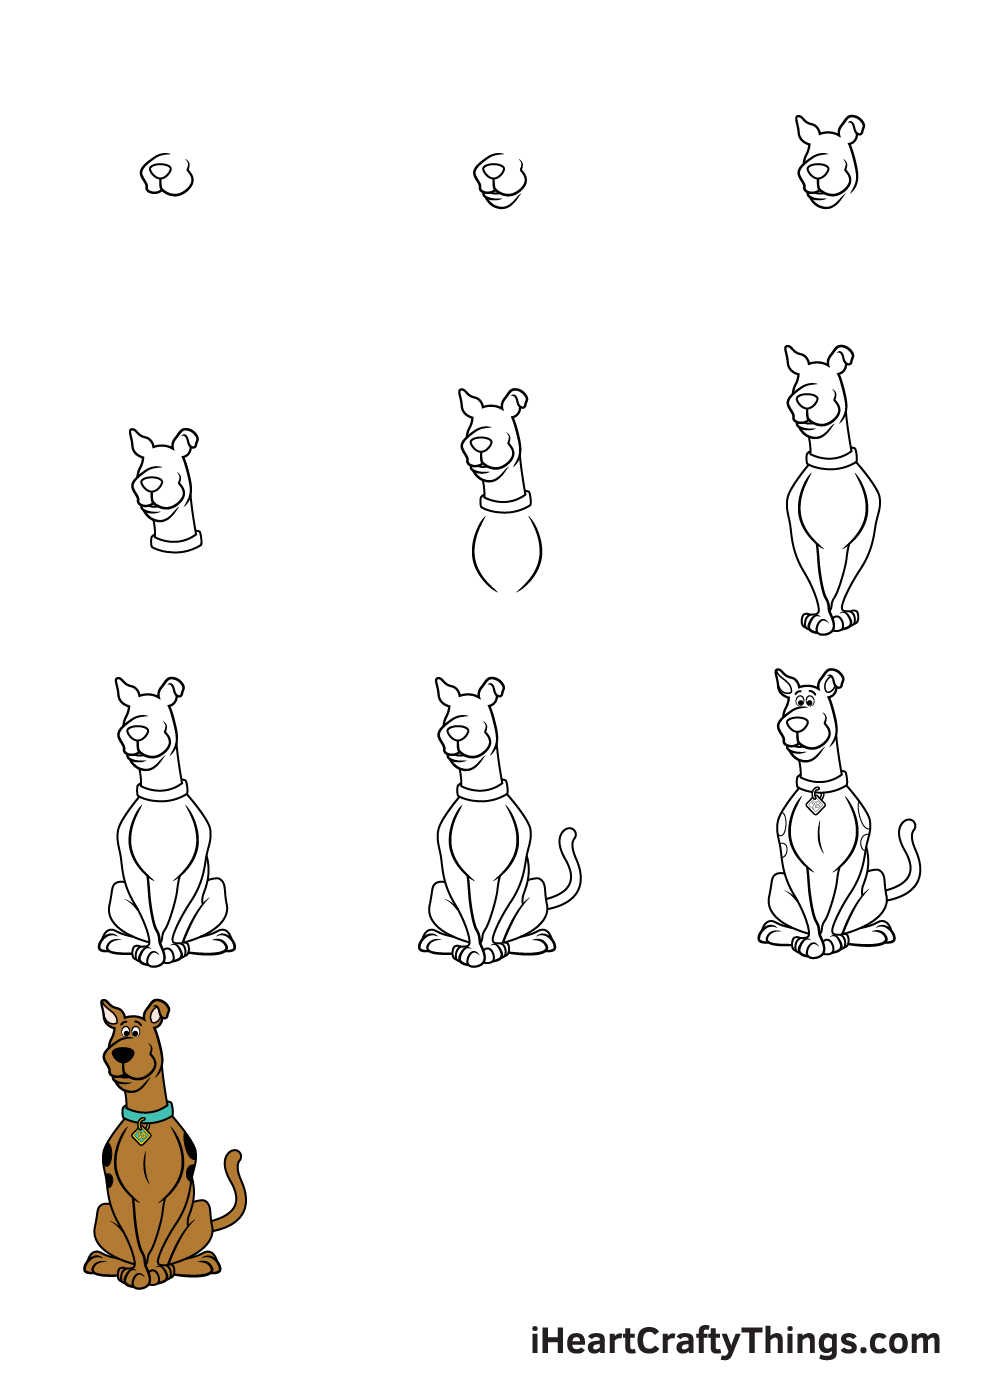 How to Draw Scooby-Doo in 9 steps